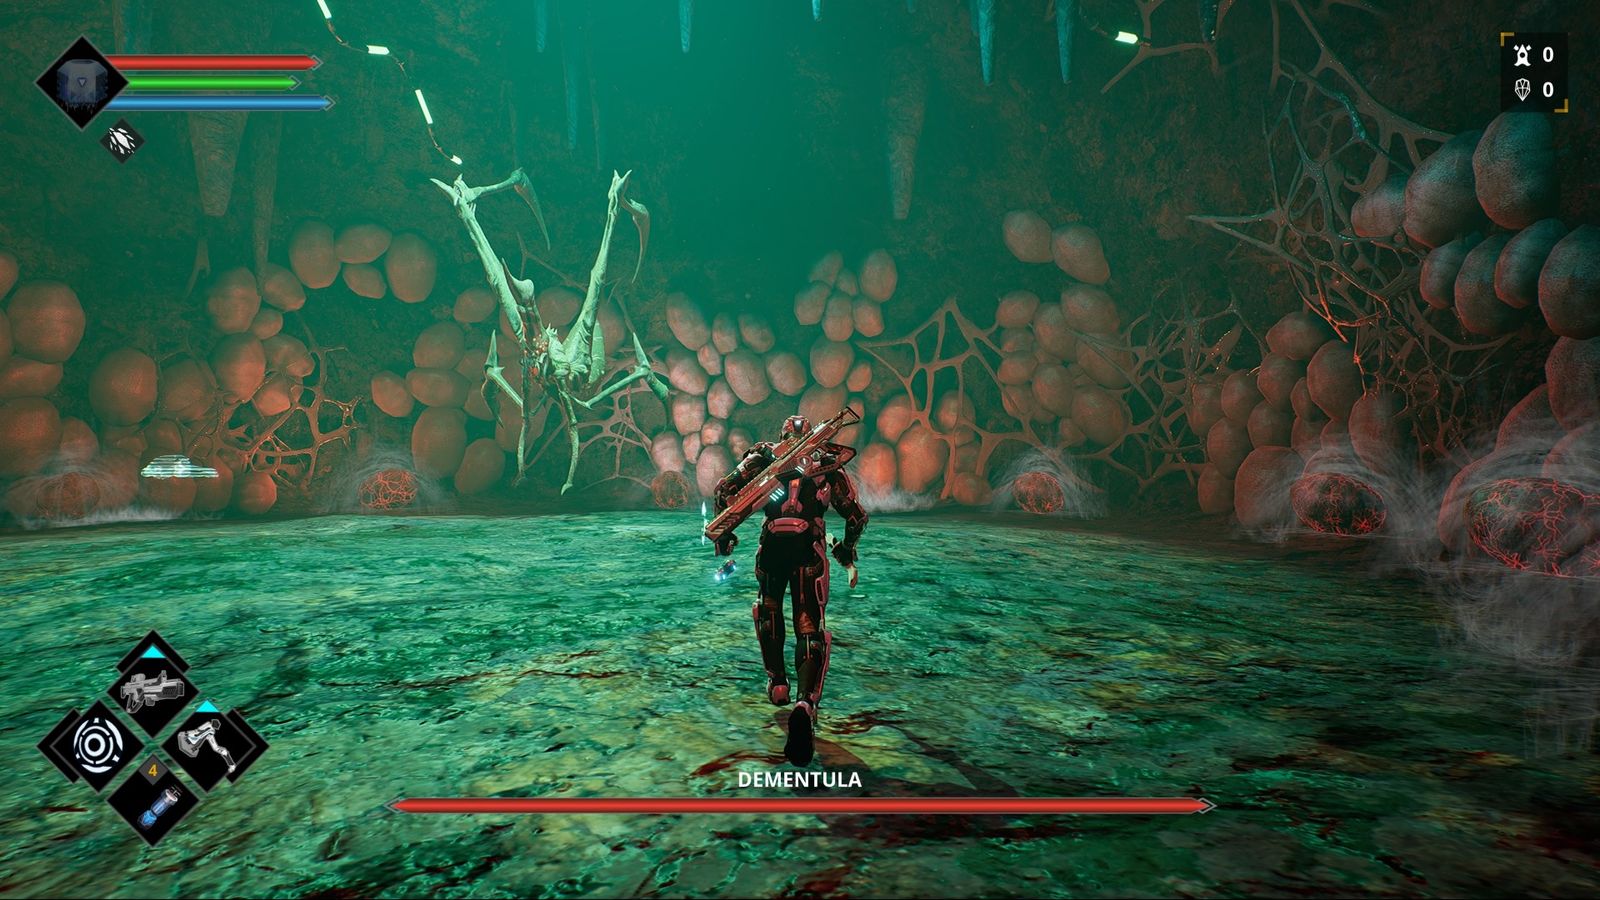 Image of the player character fighting the Dementula boss in Dolmen.